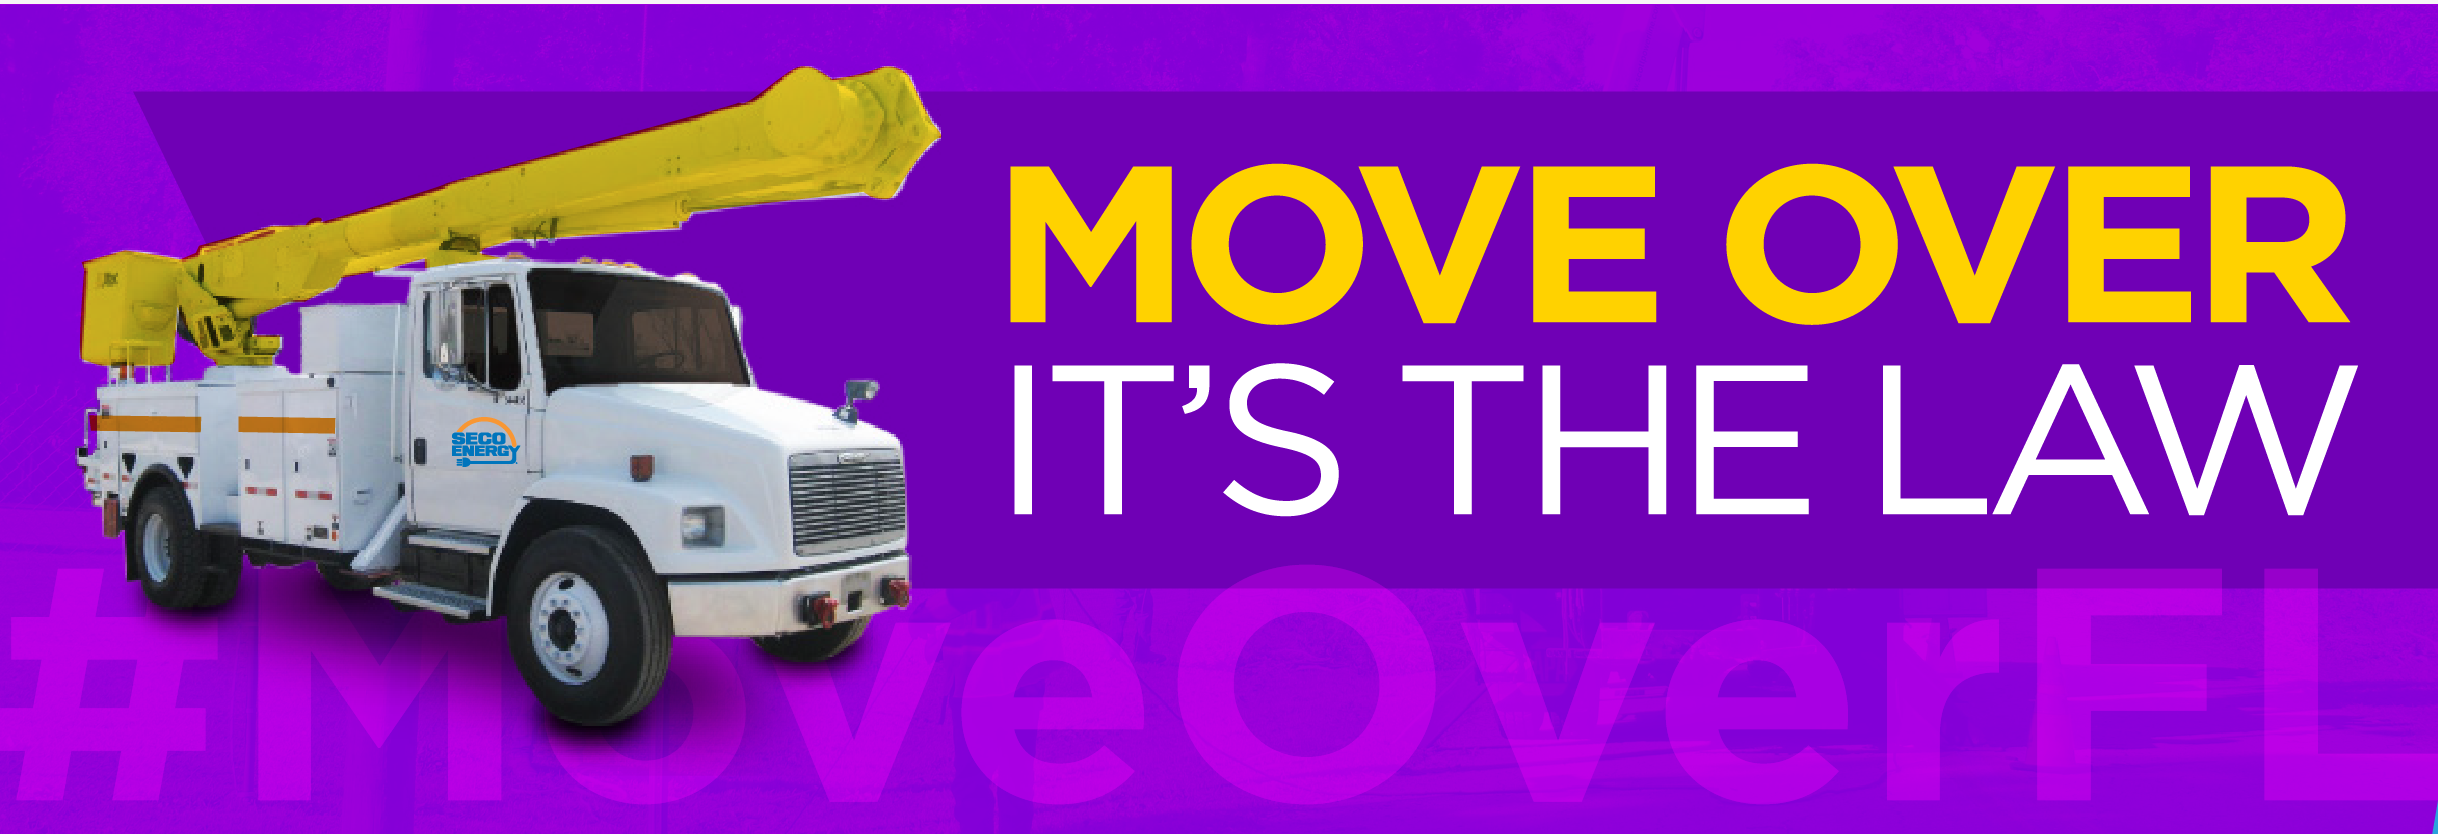 SECO News May 2020 Move Over - It's The Law banner